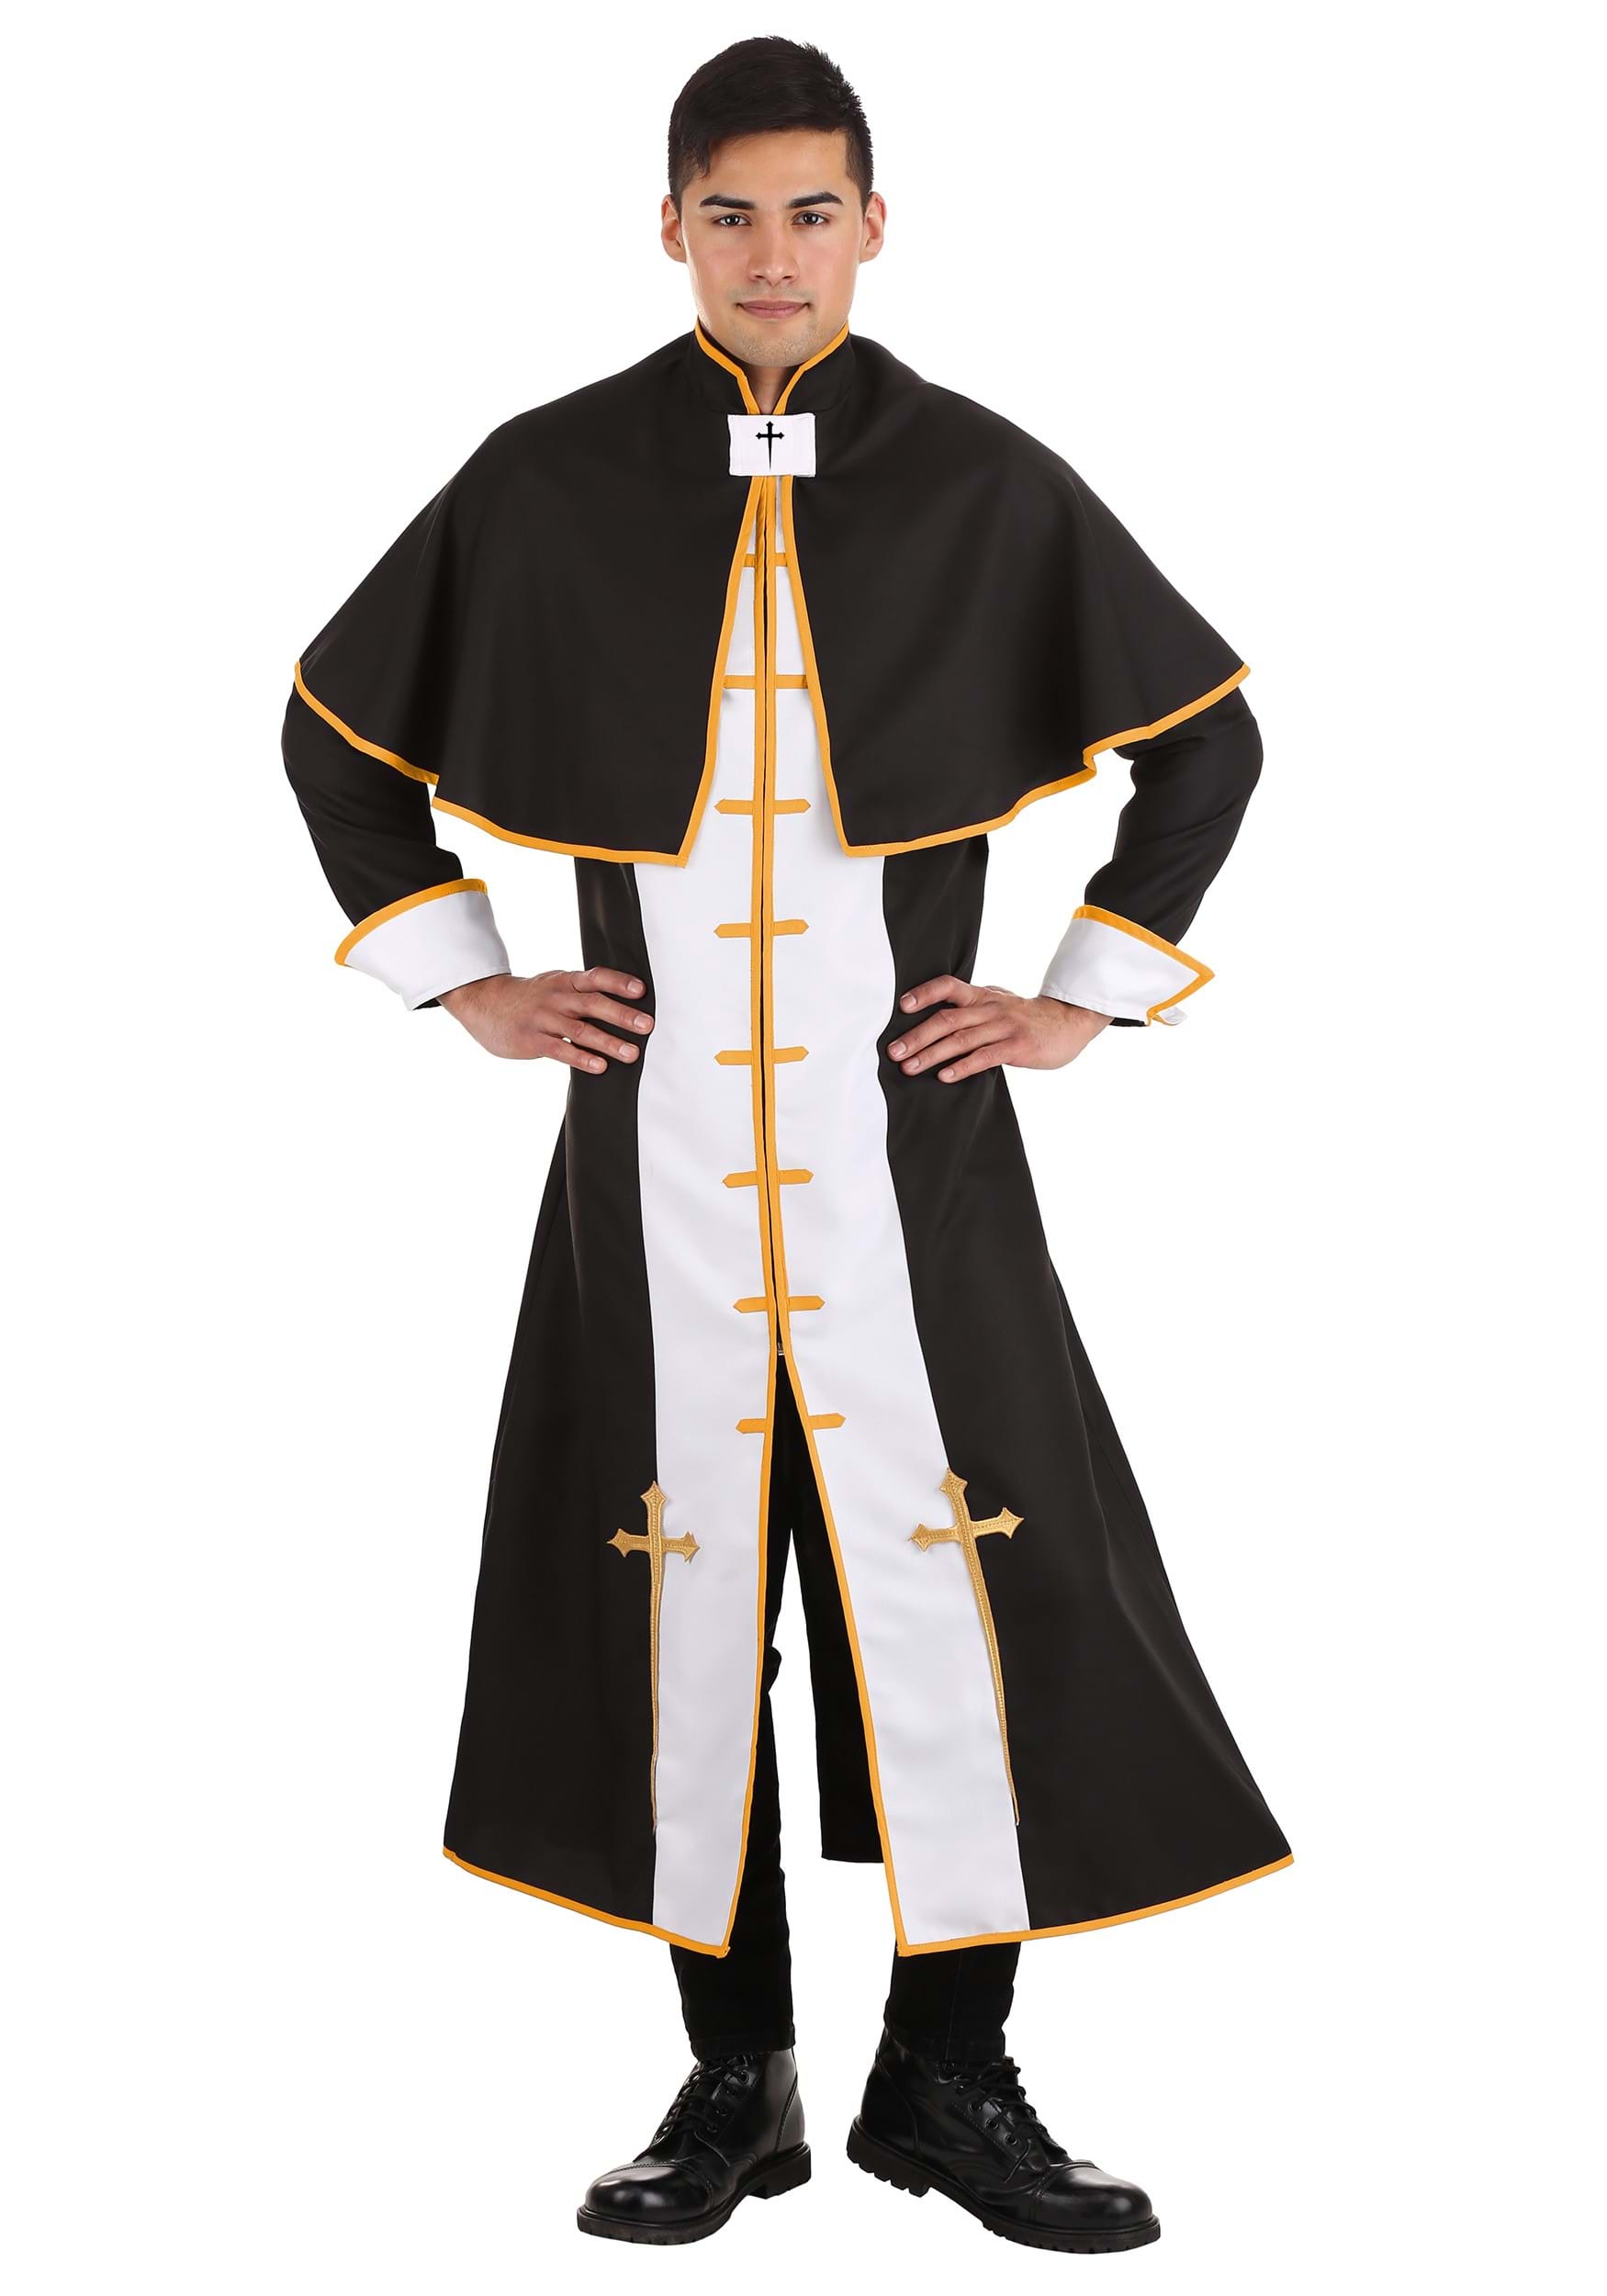 Photos - Fancy Dress Fancy FUN Costumes Holy Priest Adult  Dress Costume Black/Brown/Whi 